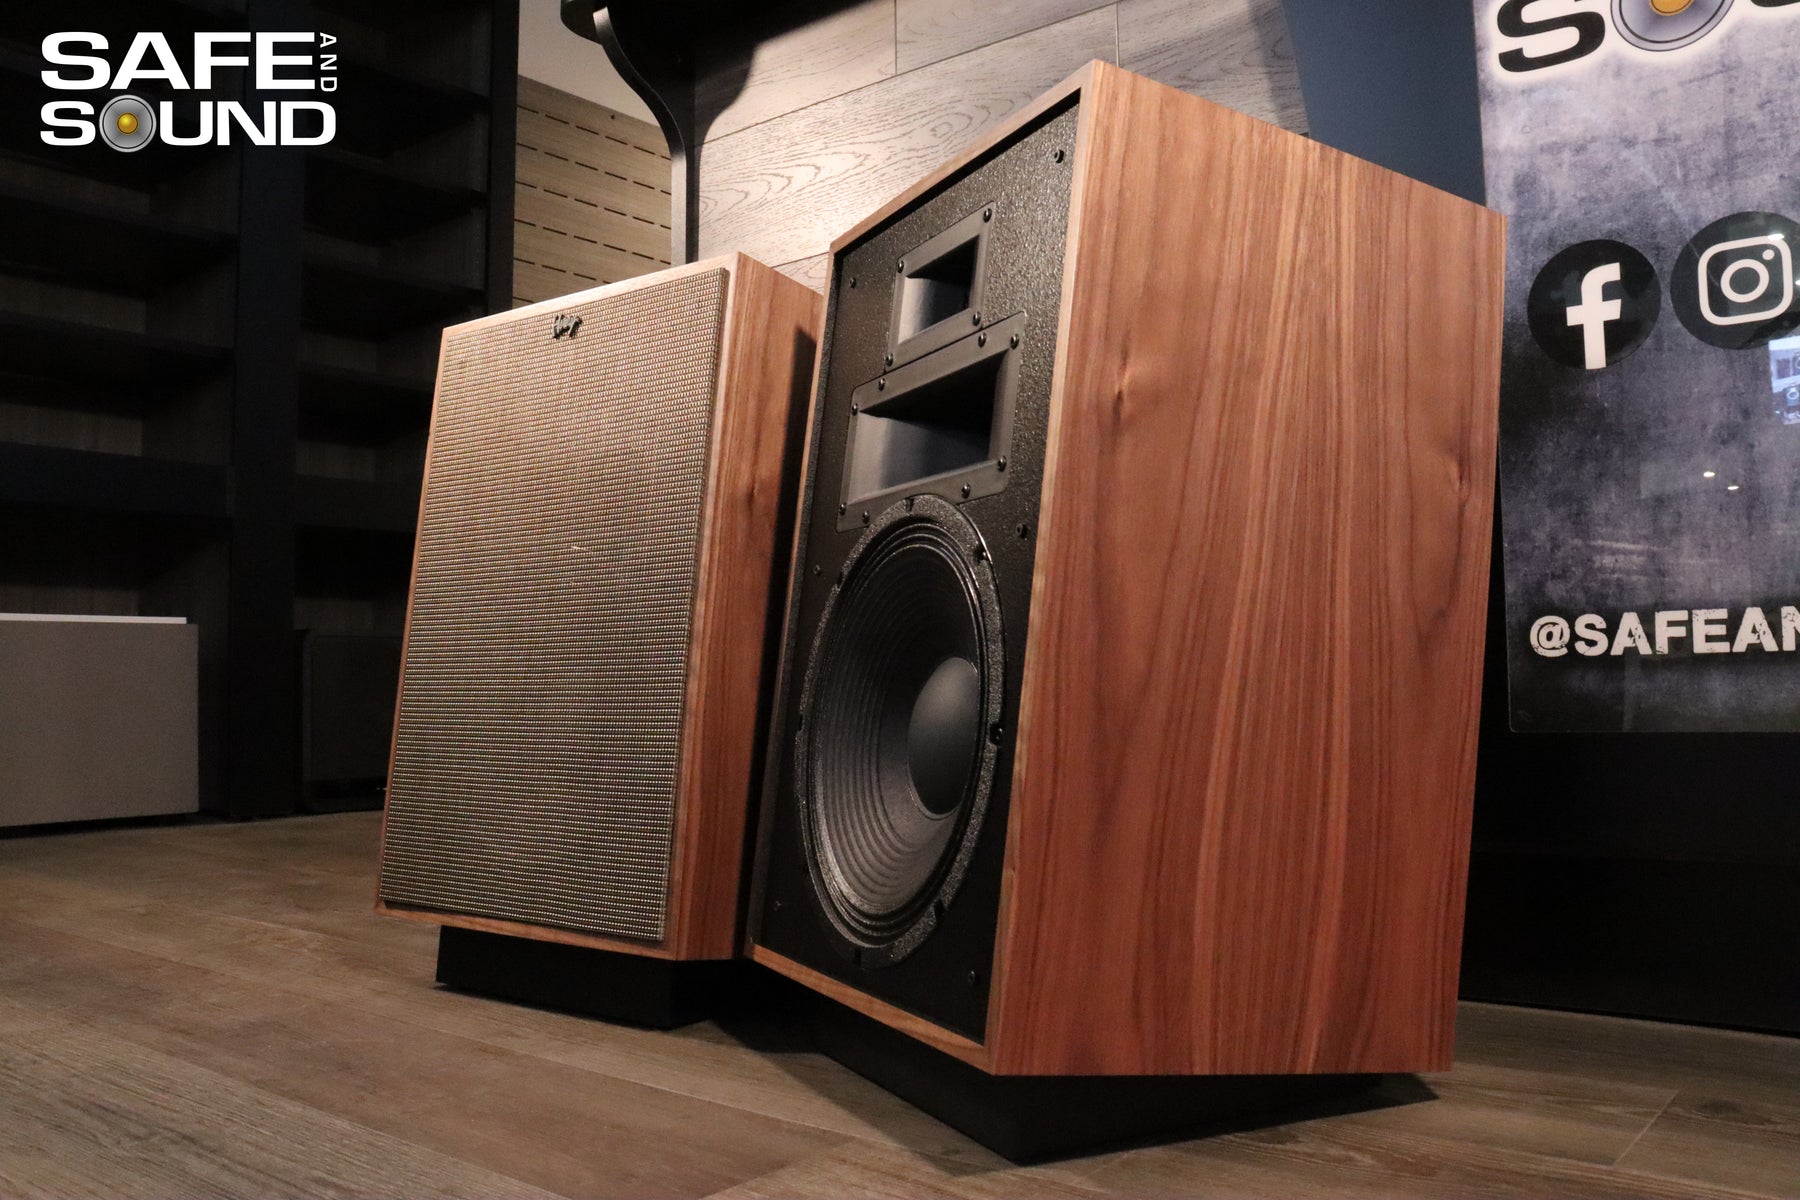 7 Reasons Why You Need a Pair of Klipsch’s Heresy IV Speakers.